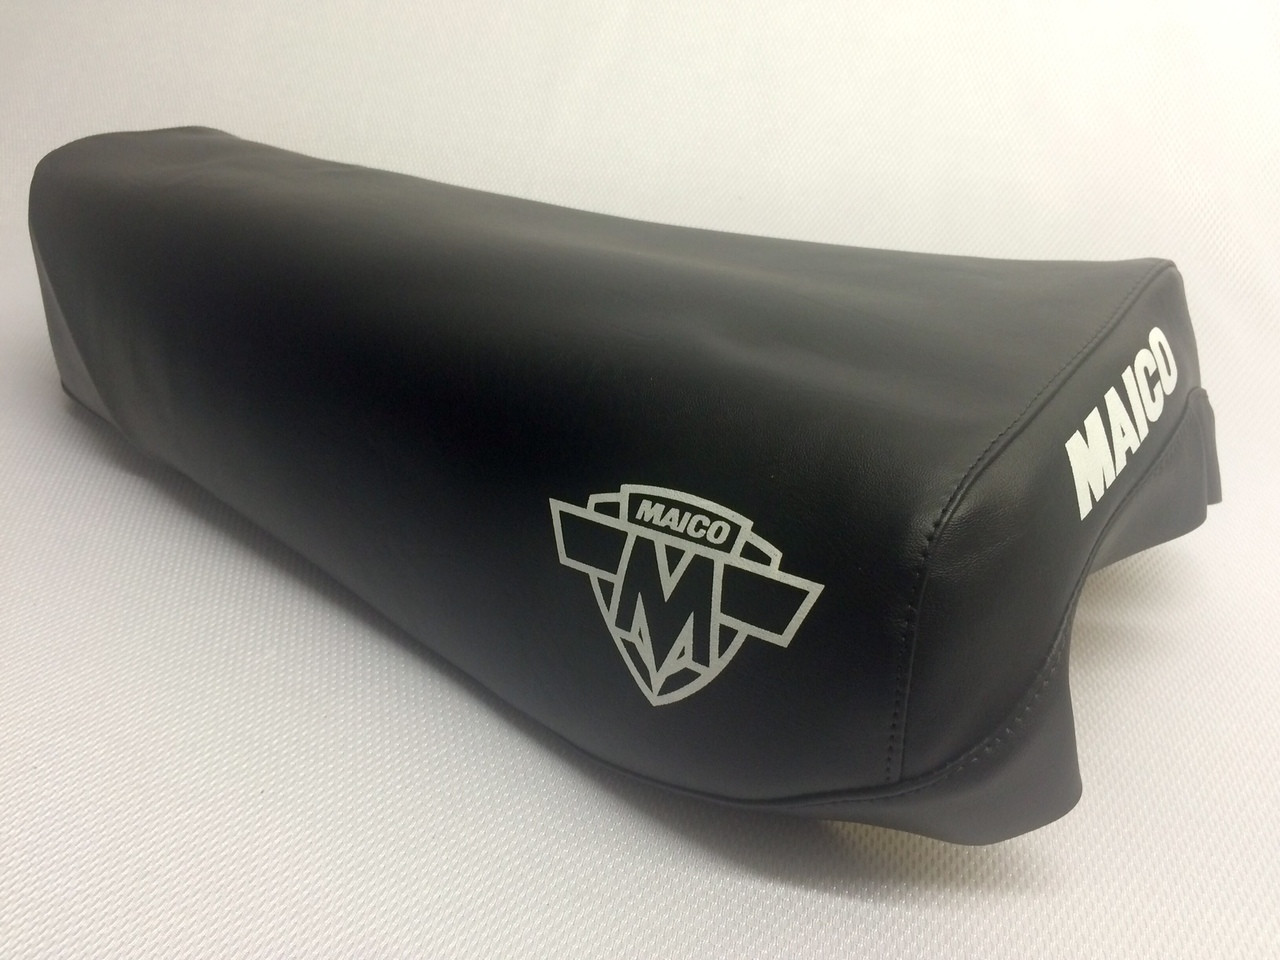 Seat Cover Maico 77-79 Black vinyl with white MAICO on rear and Shield logo on sides.